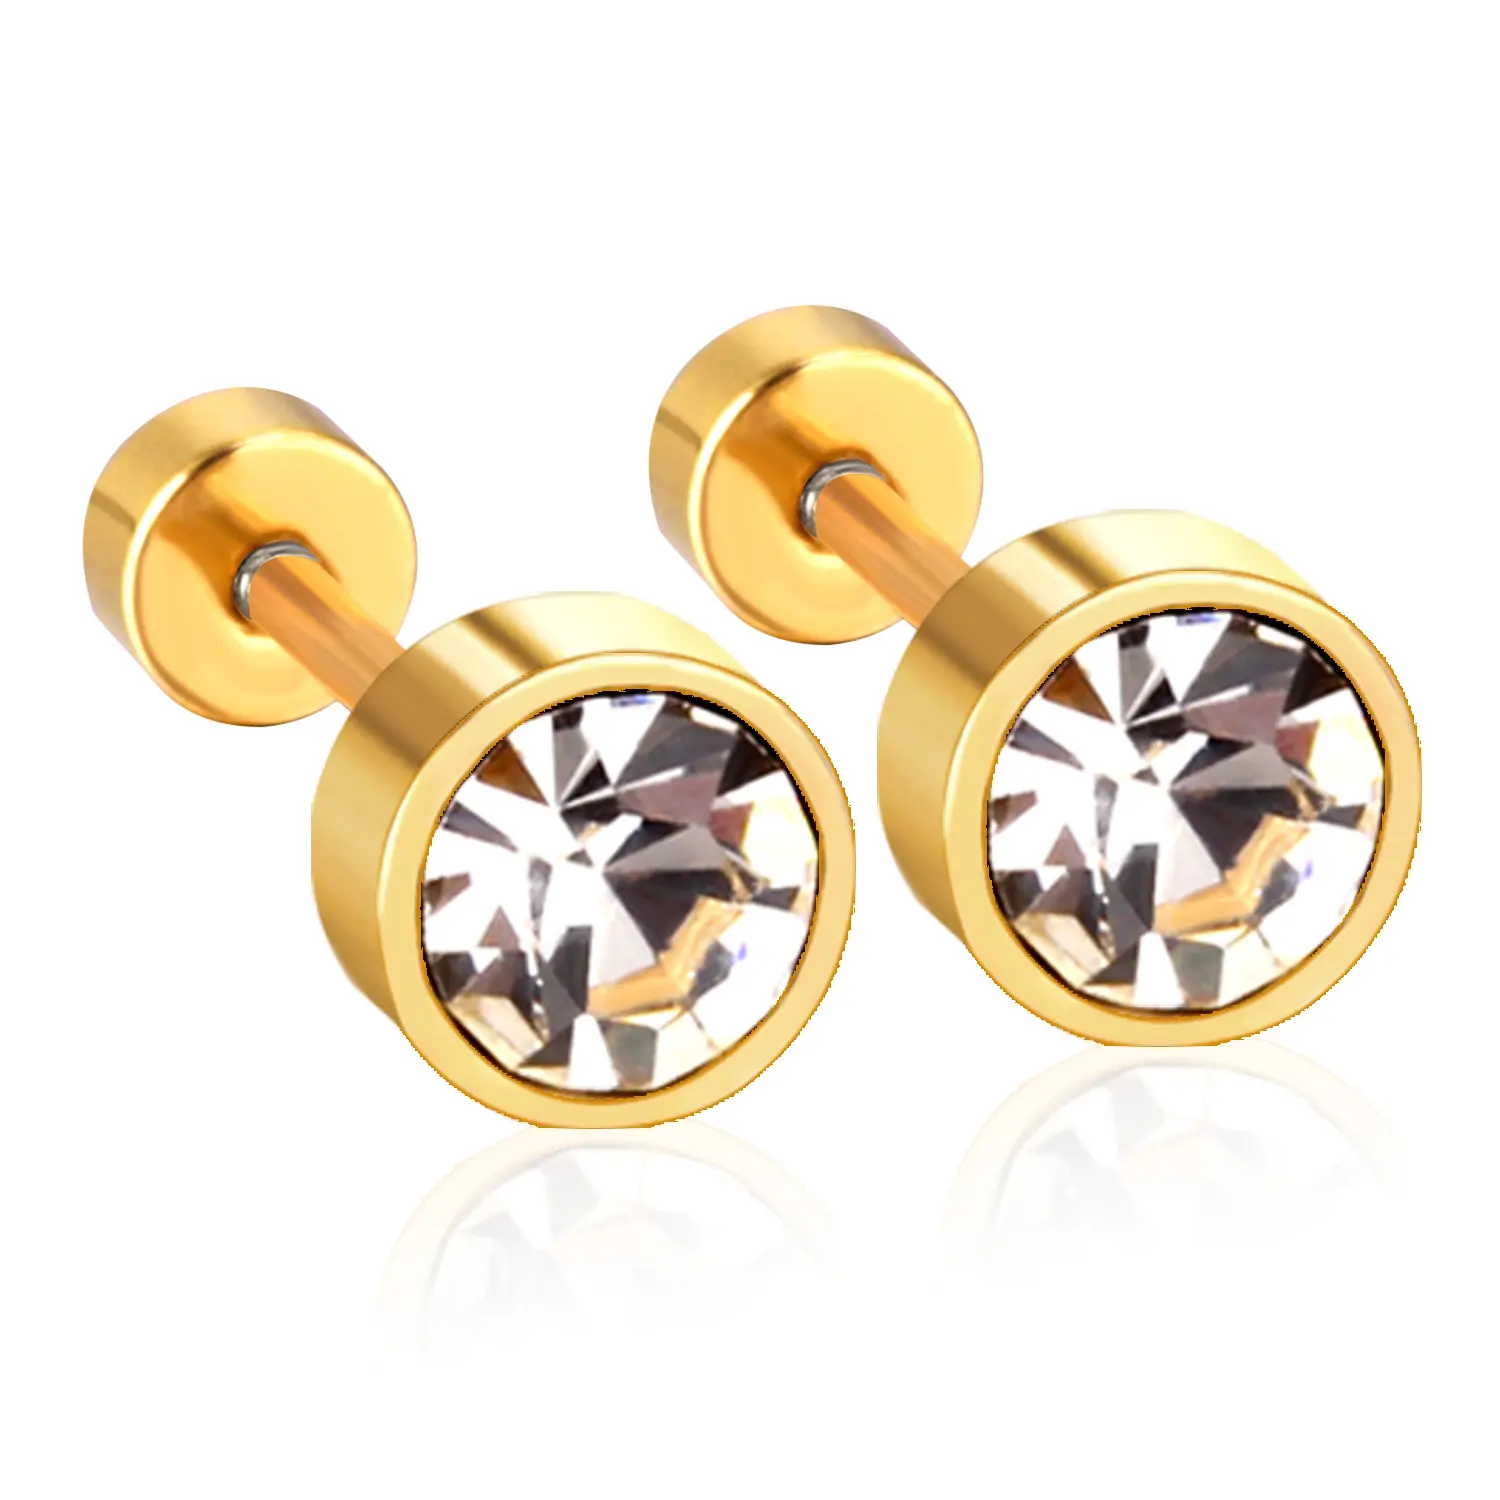 Brand New Gold Cylindrical White Crystal Plug Earrings,Good quality Wholesale Price Earring Pressure